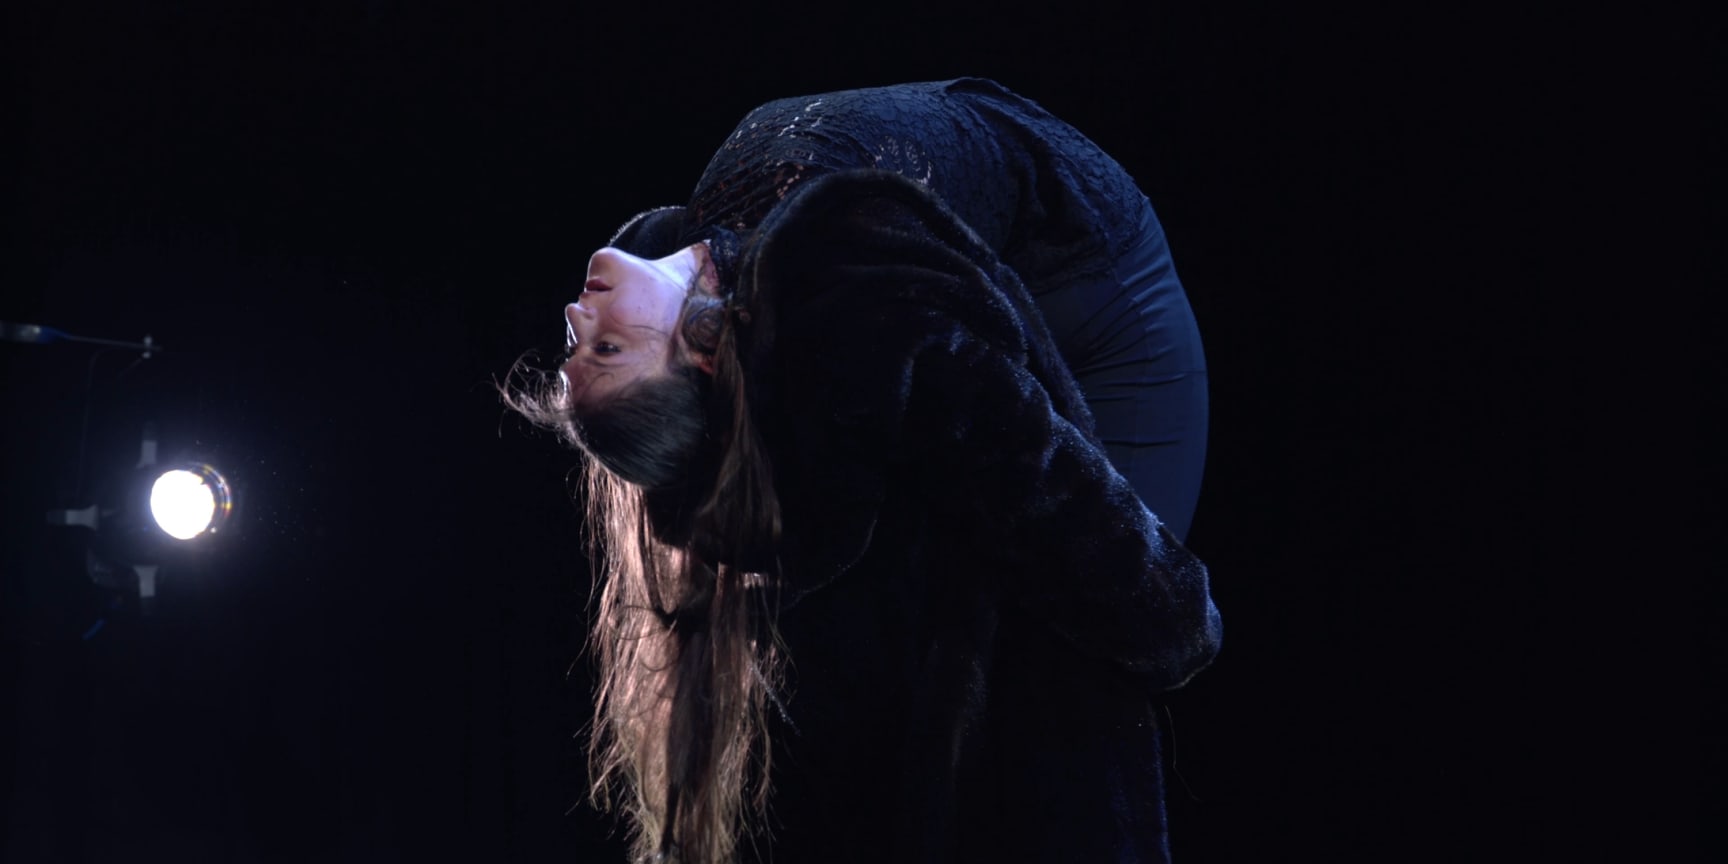 Hannah Finn, a white woman wit long brown hair, bends backwards on a dimly lit stage